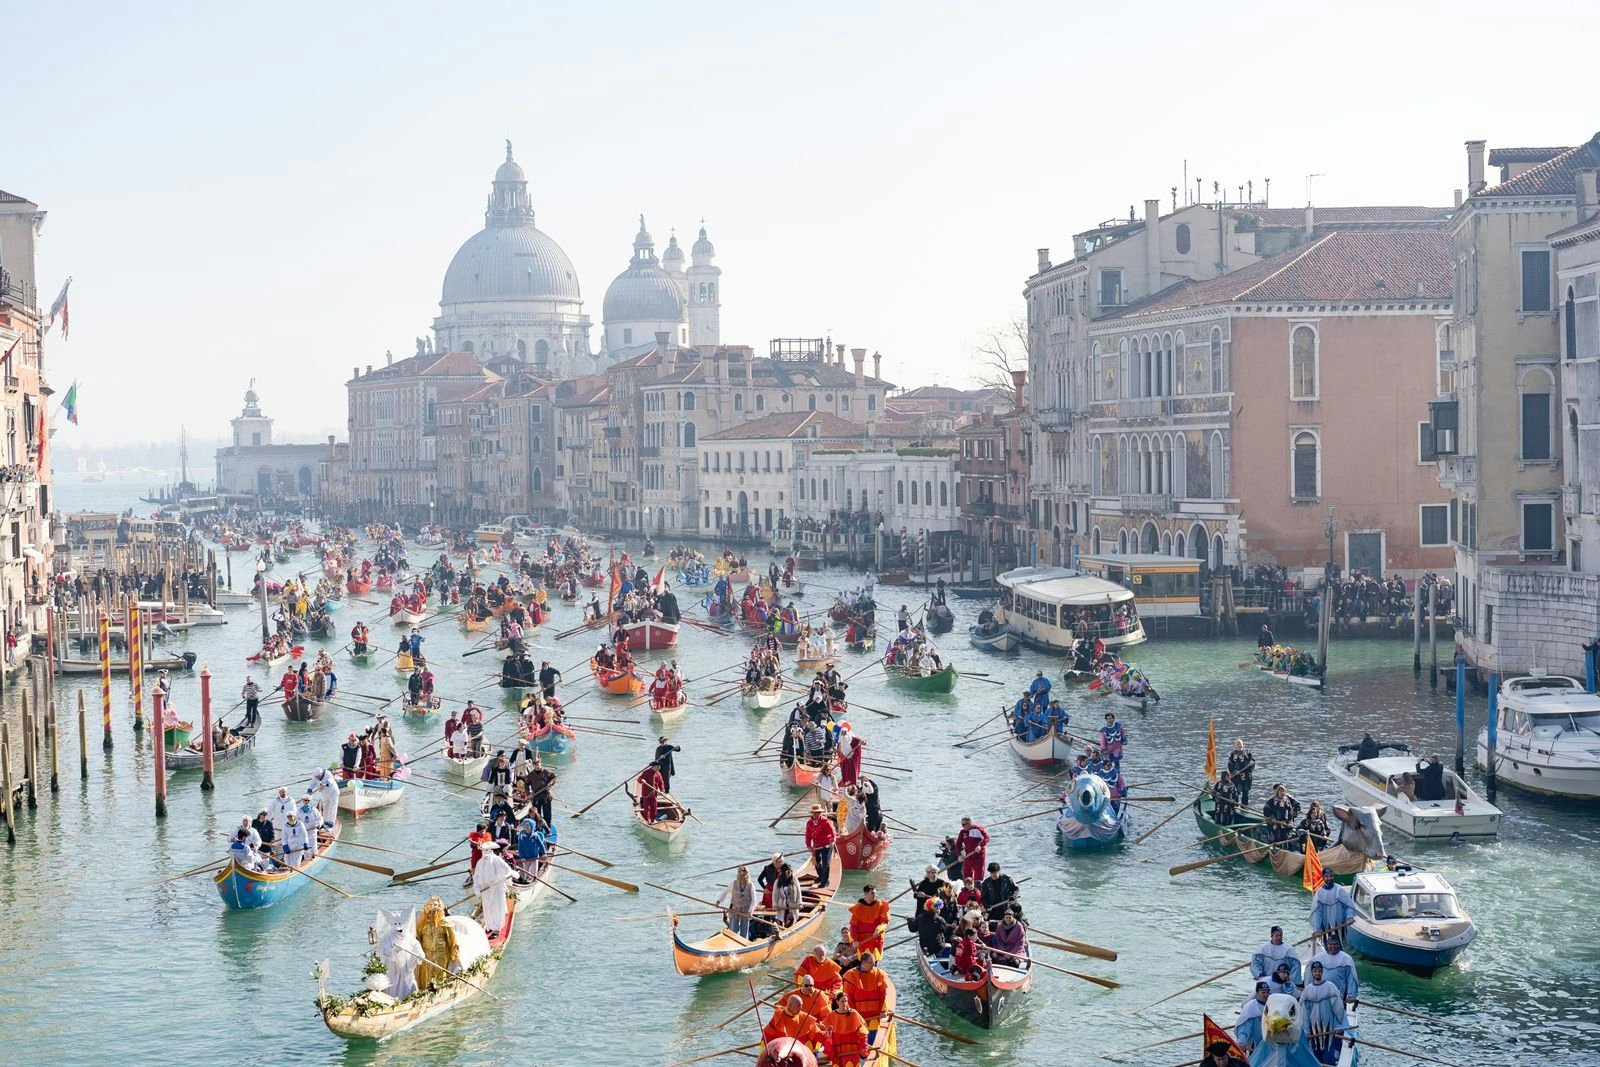 Lots of boats on the Grand Canal in Venice celebrating the carnival